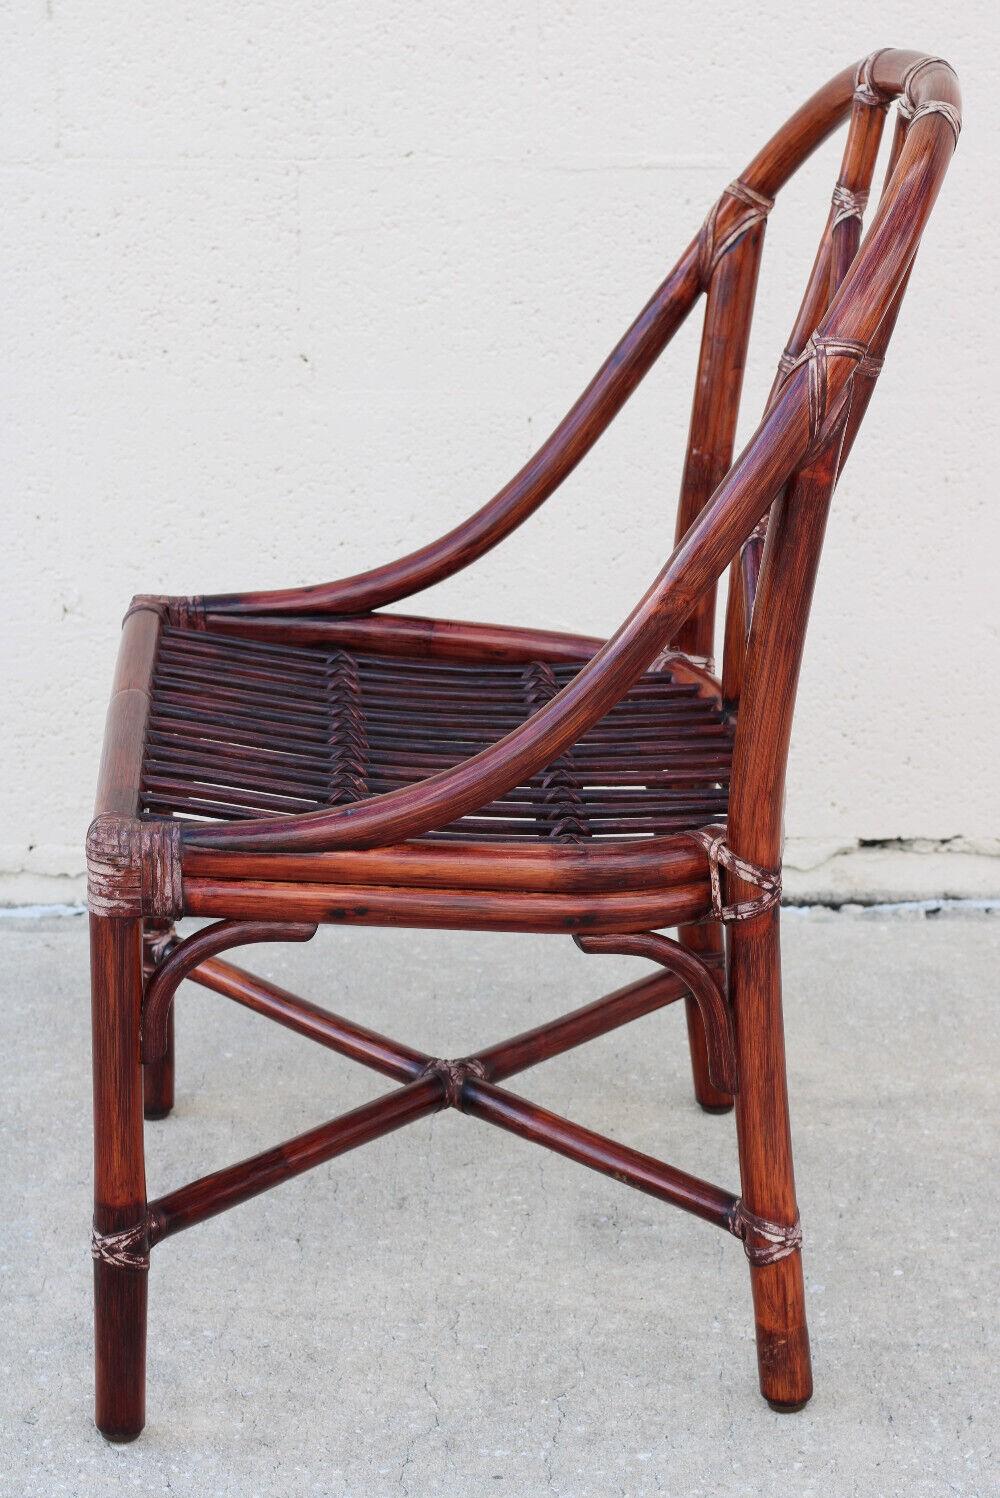 Elinor McGuire for McGuire San Francisco Rattan Dining Chairs, a Set of 4 In Good Condition For Sale In Vero Beach, FL